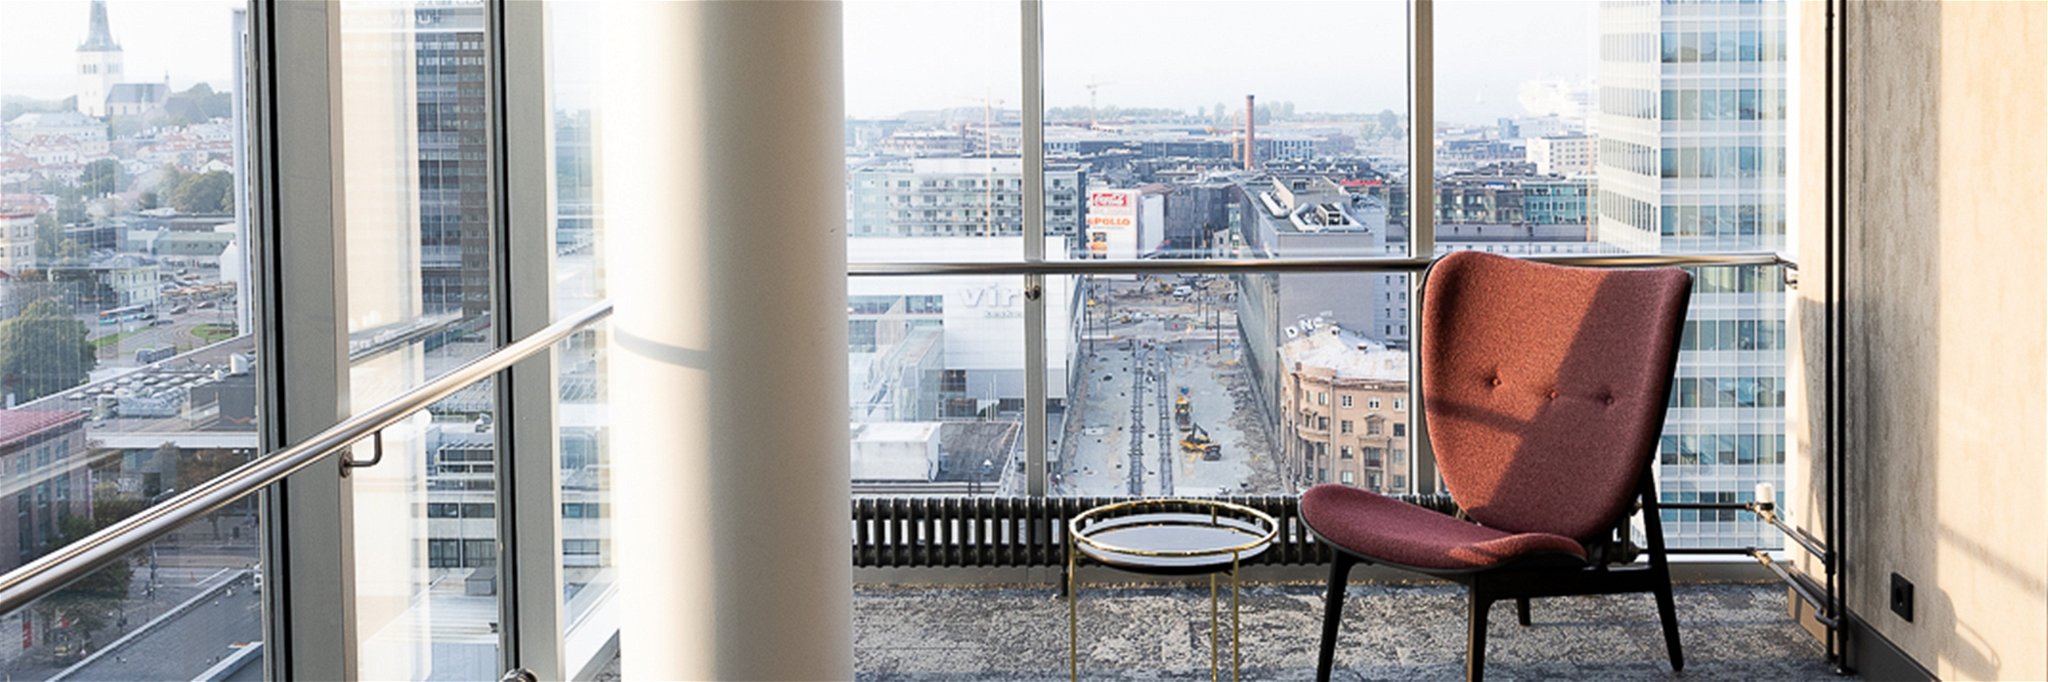 Sit back and enjoy the views from the hallways of the Radisson Collection Hotel Tallinn